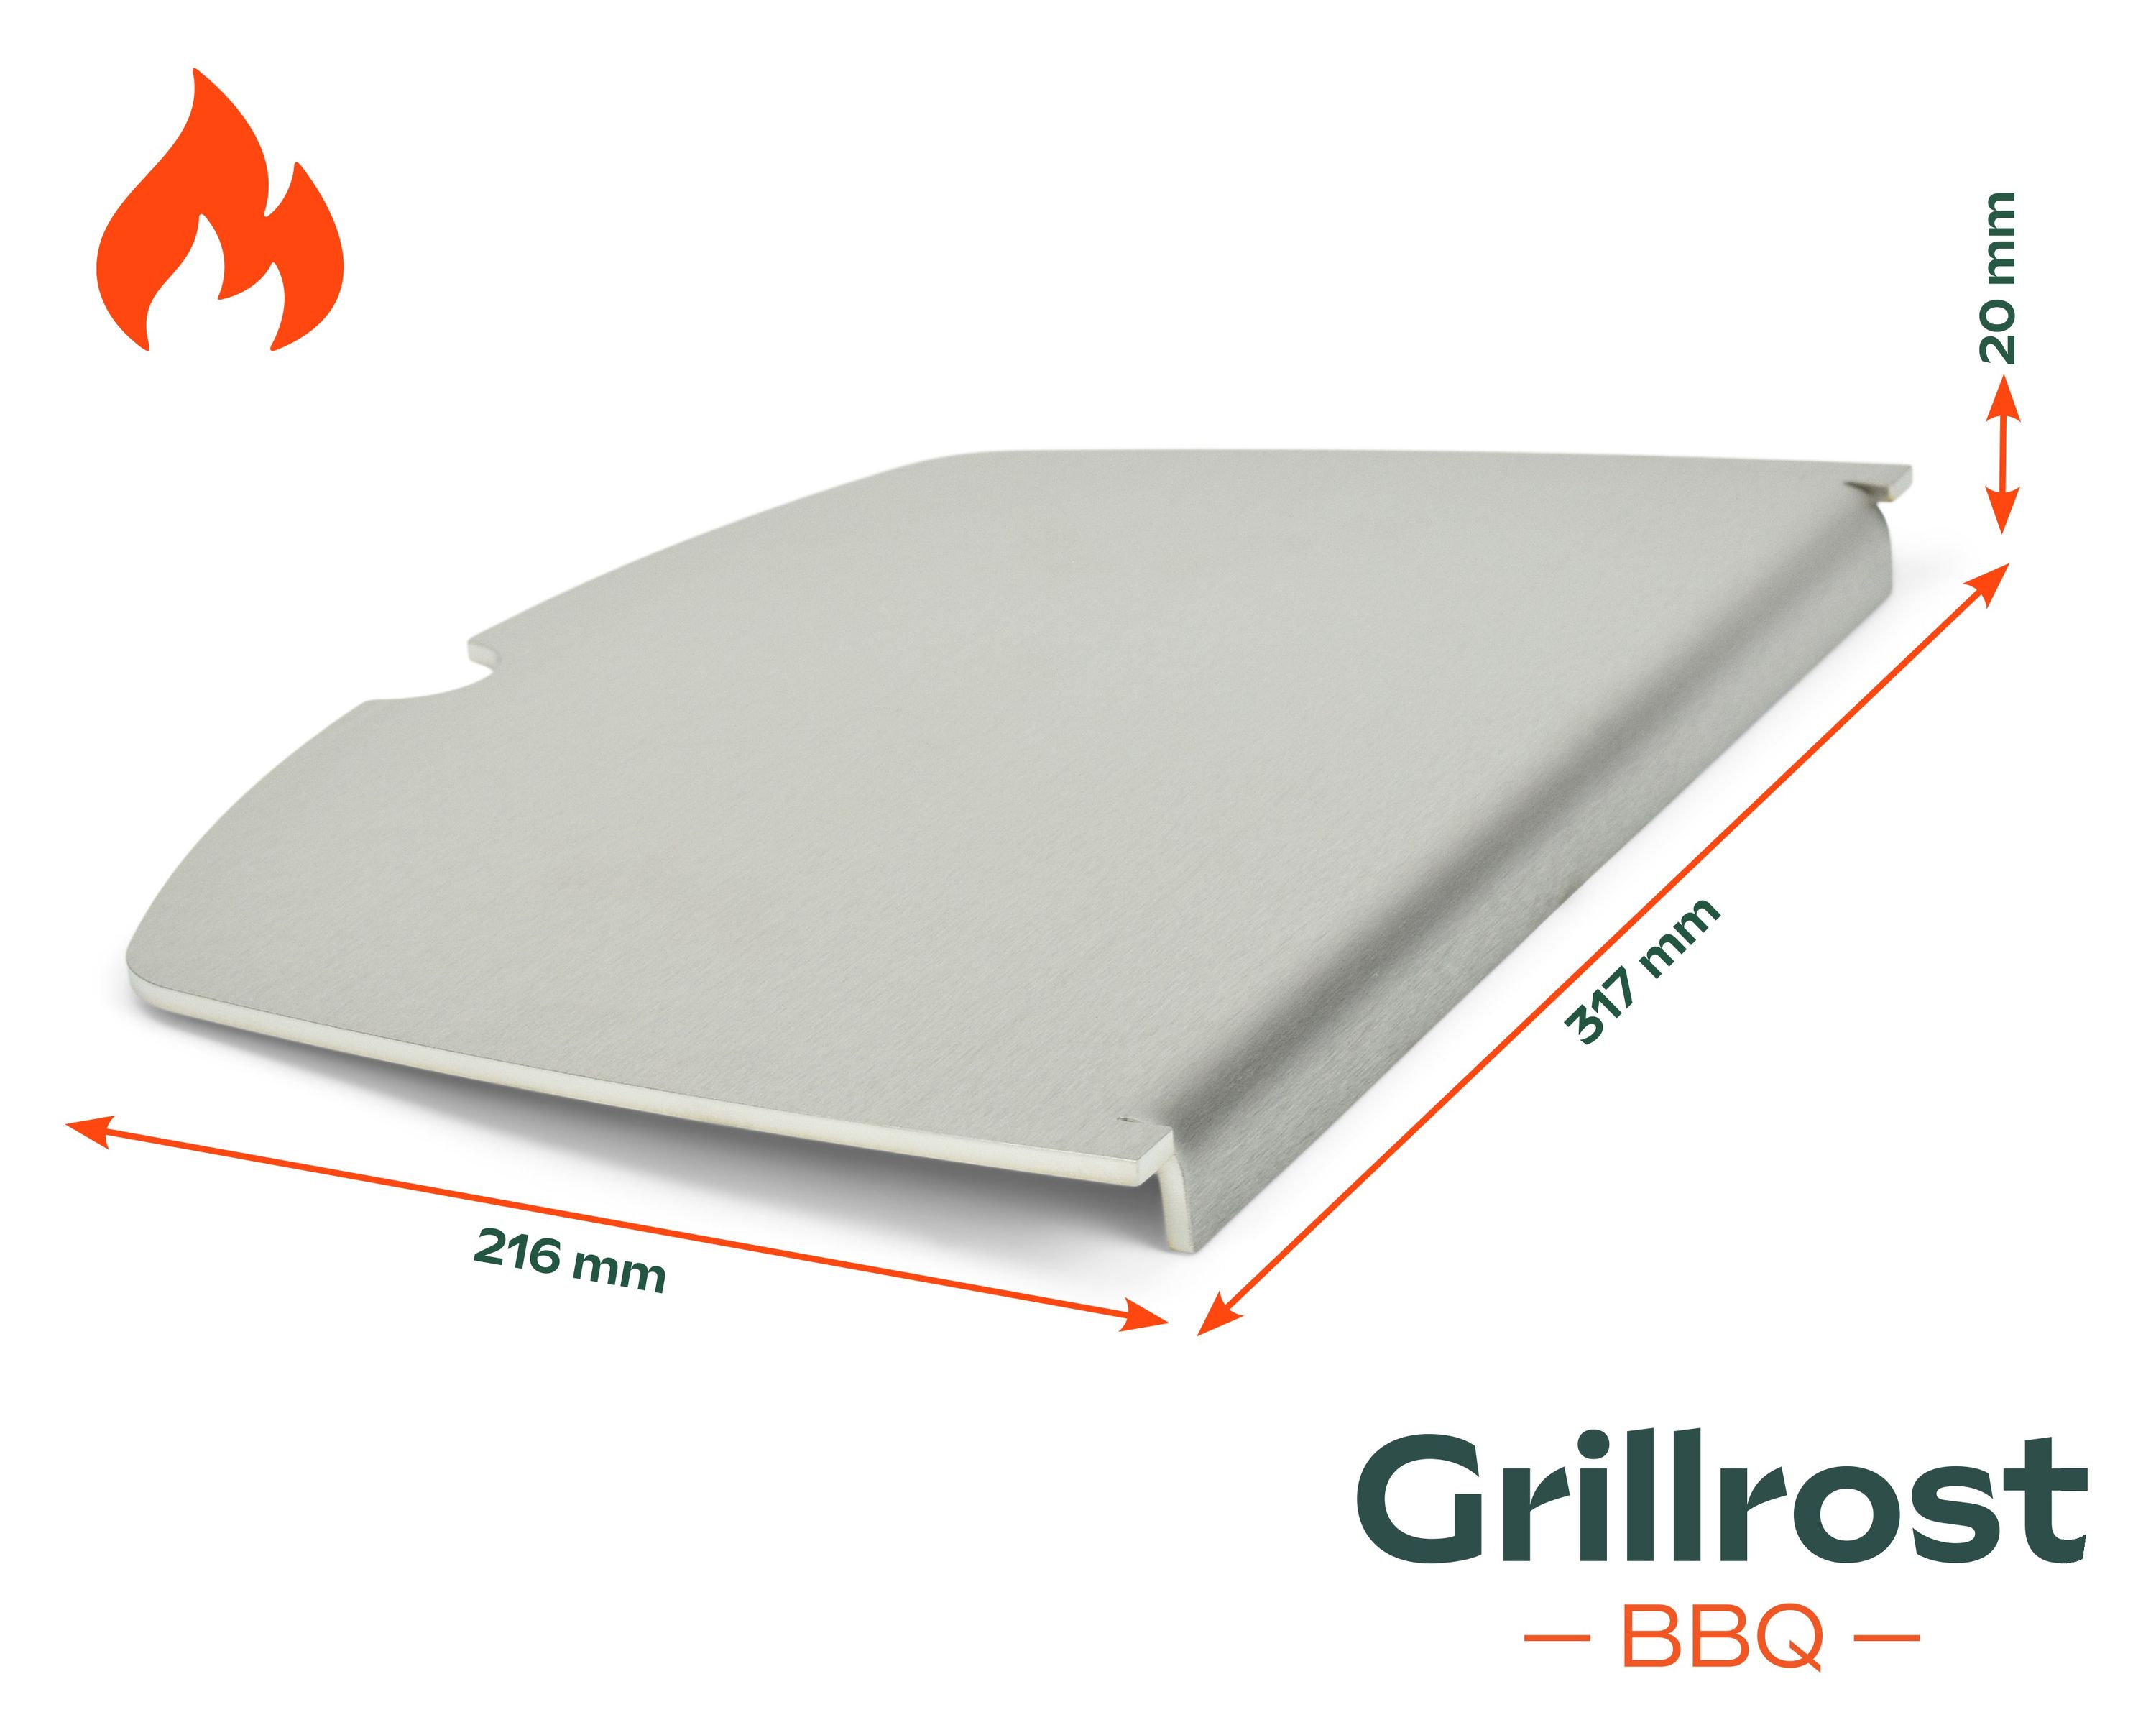 Stainless Steel Plancha for Weber Grill plate Q100 and Q1000 models